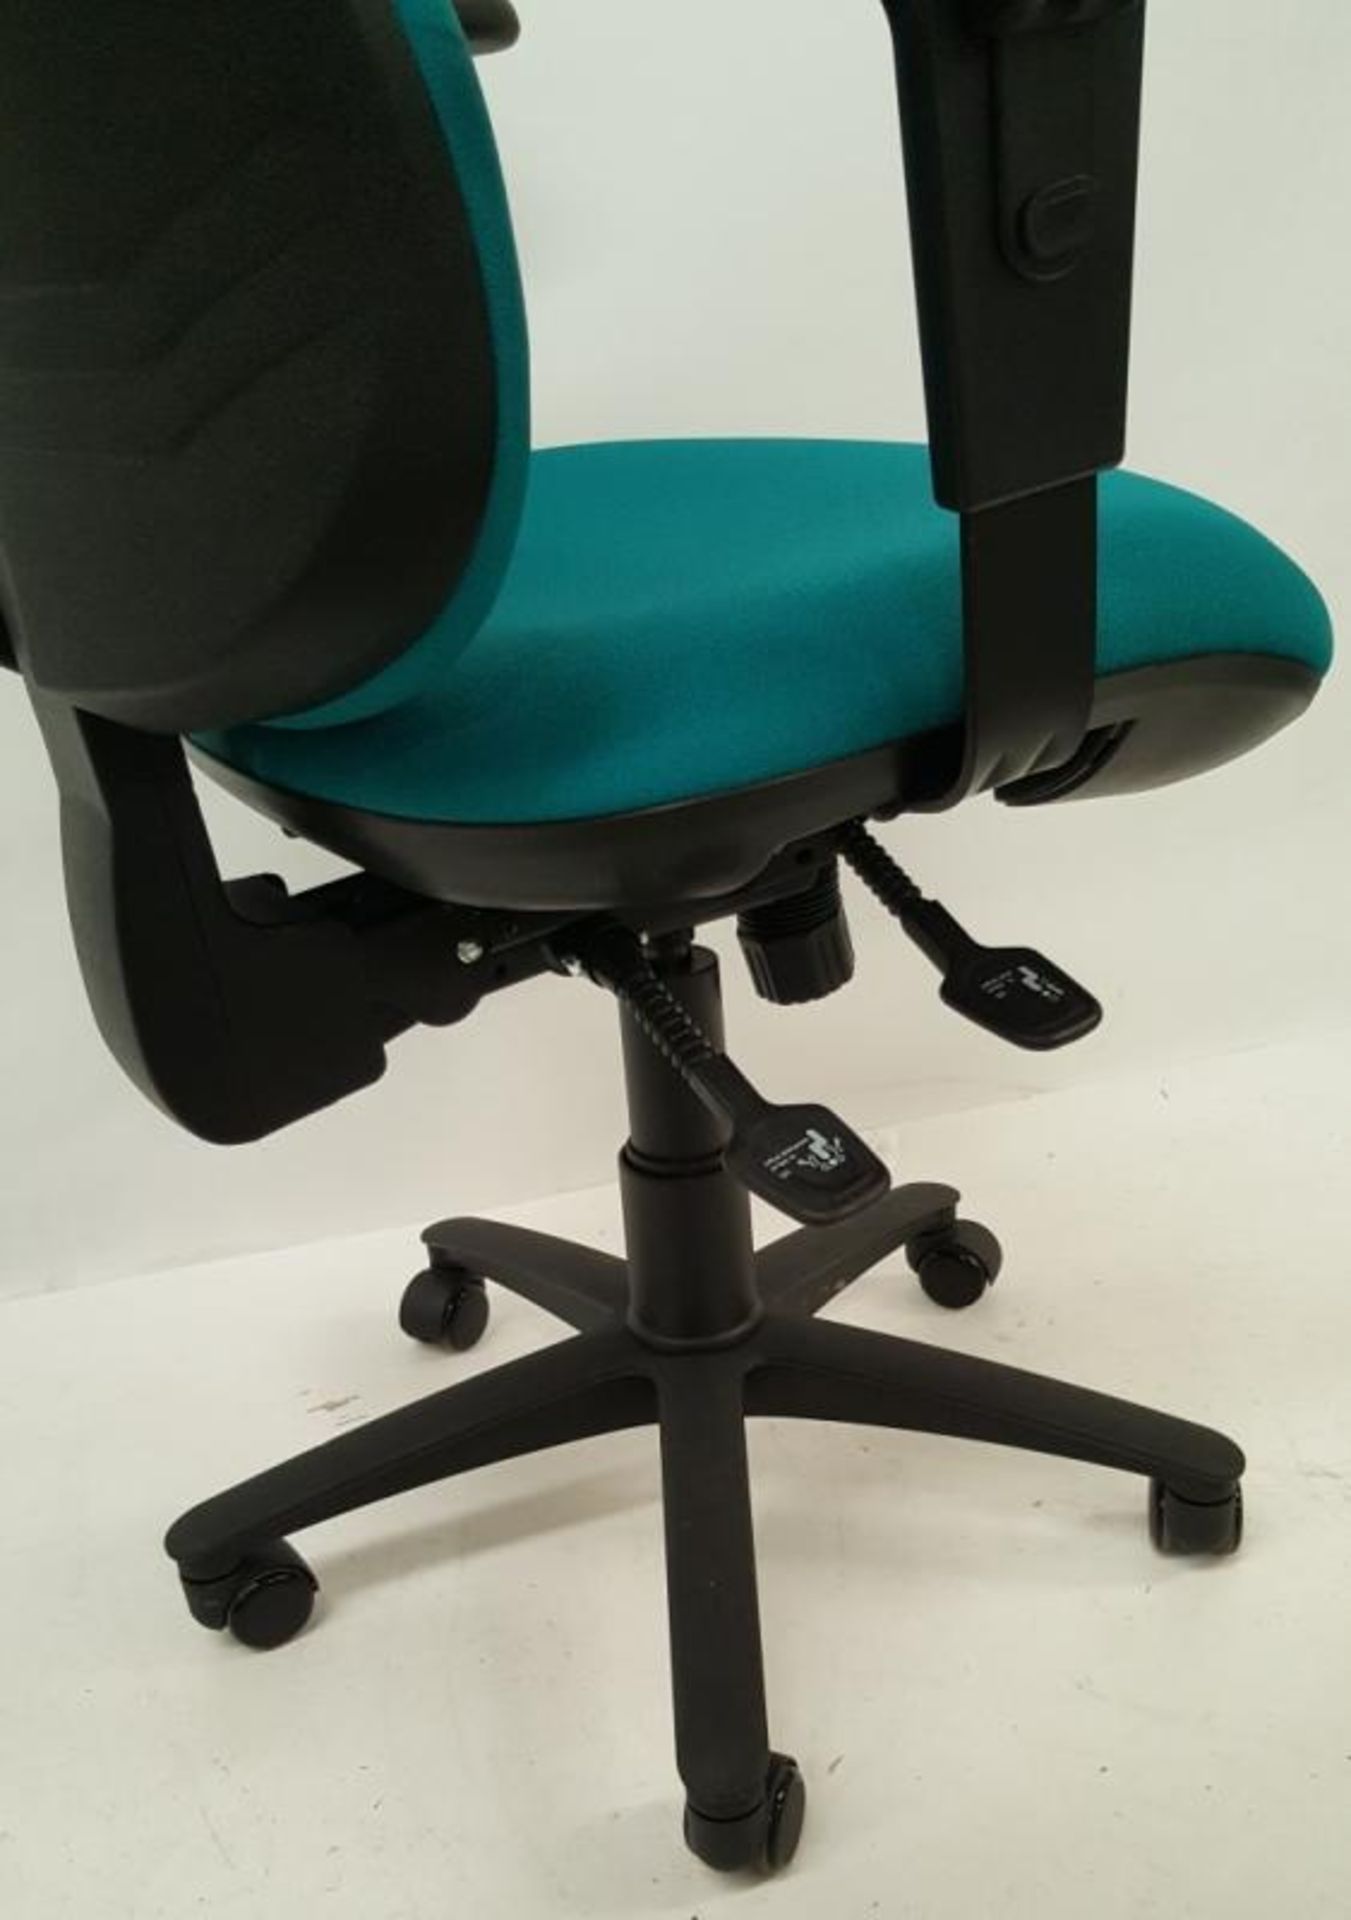 4 x OCEE Design ‘TICK’ Premium High Back Office Chairs In Turquoise With Adjustable Height And Synch - Image 3 of 9